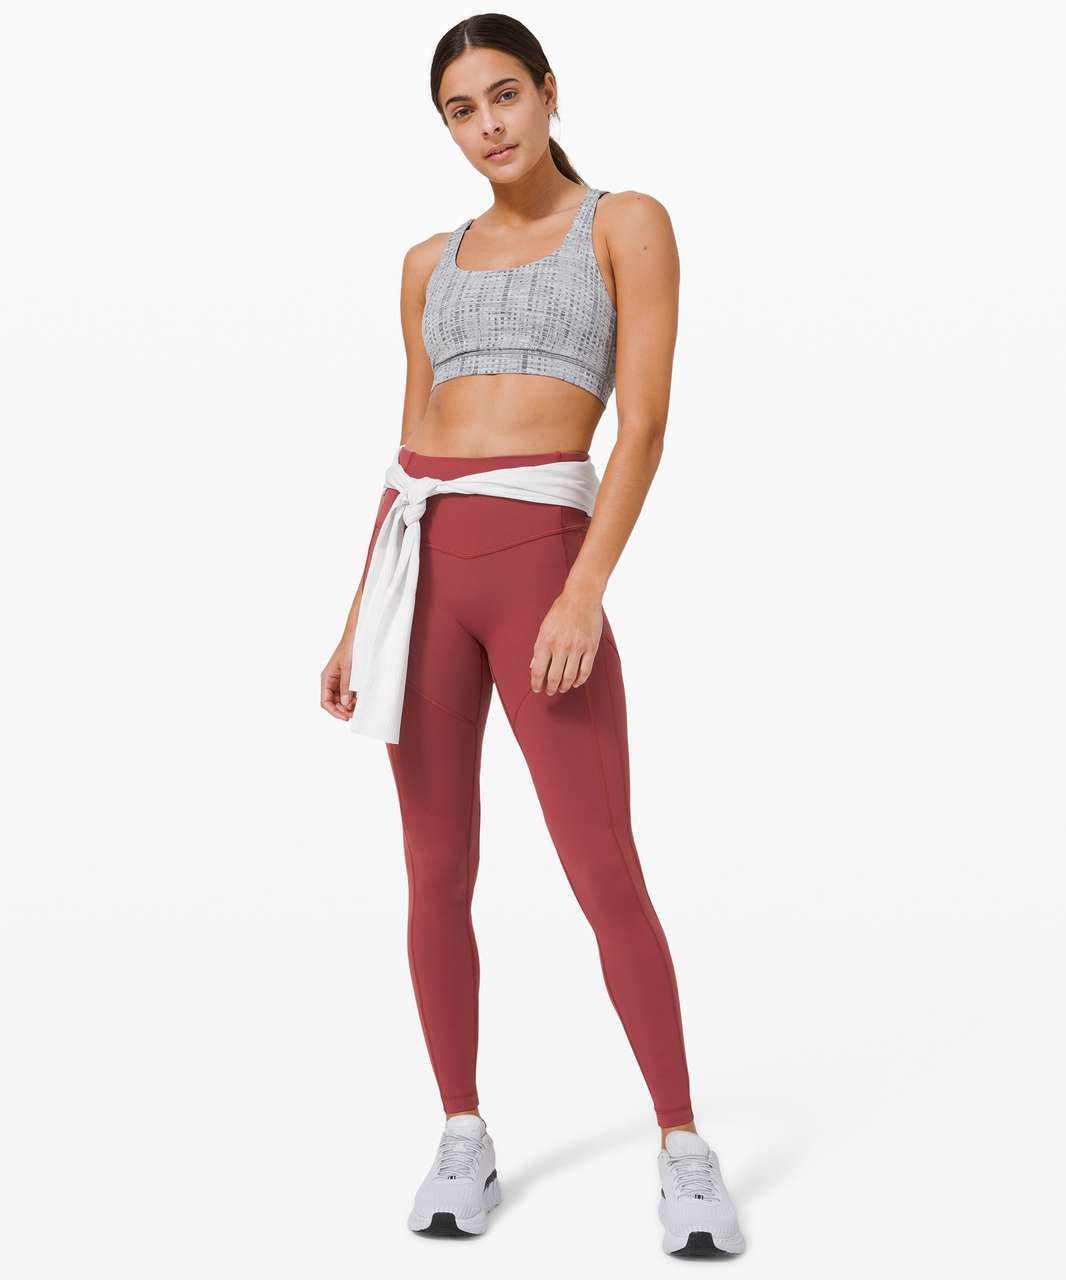 Lululemon All The Right Places Pant II 28" - Chianti